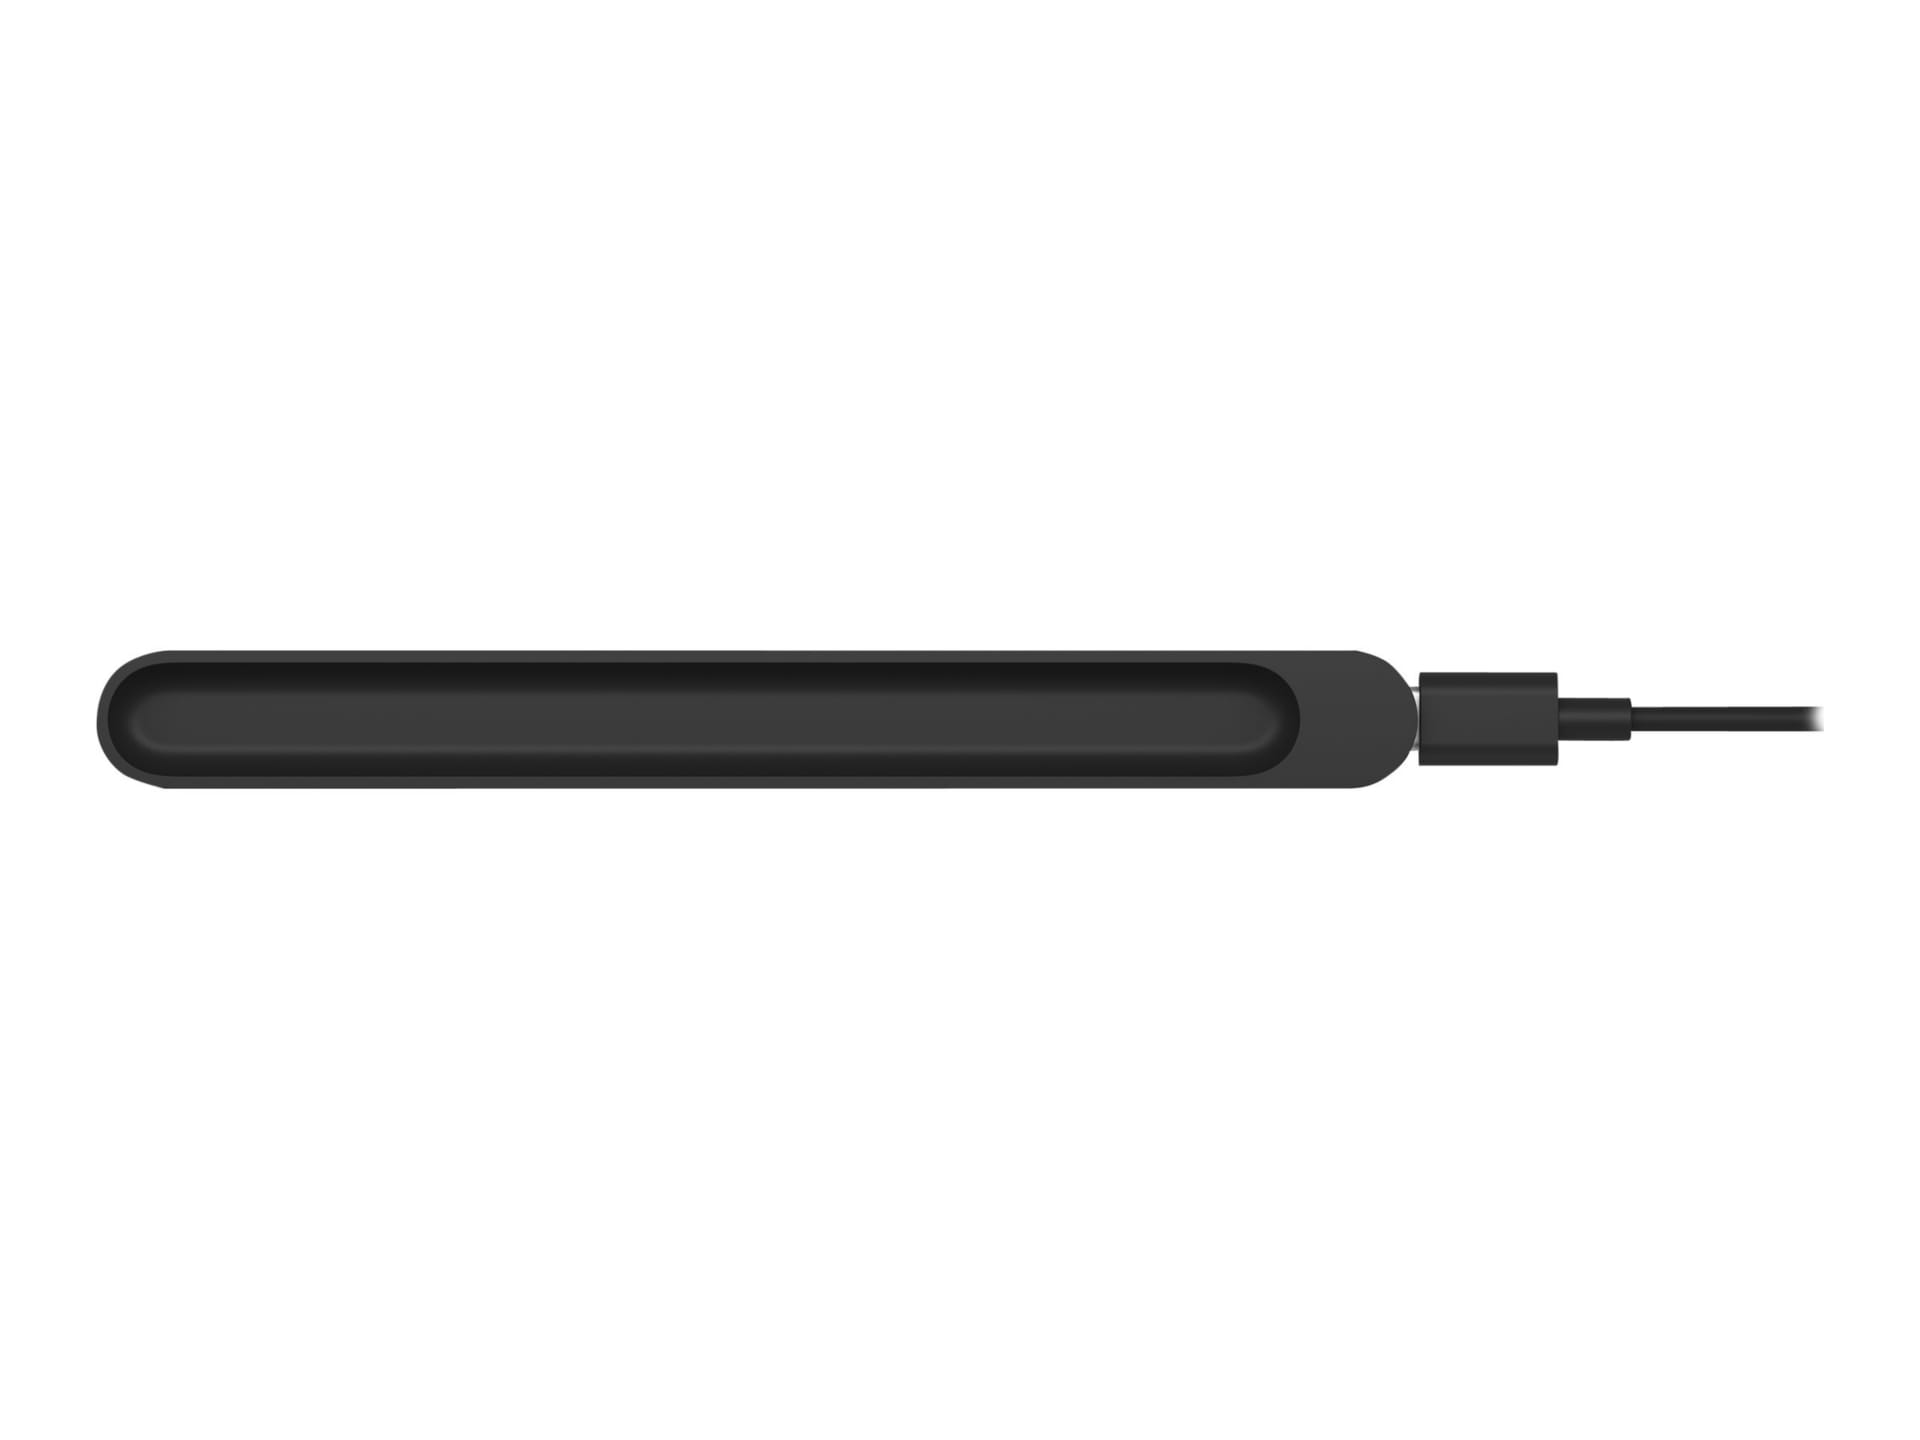 Microsoft Surface Slim Pen Charger - charging cradle